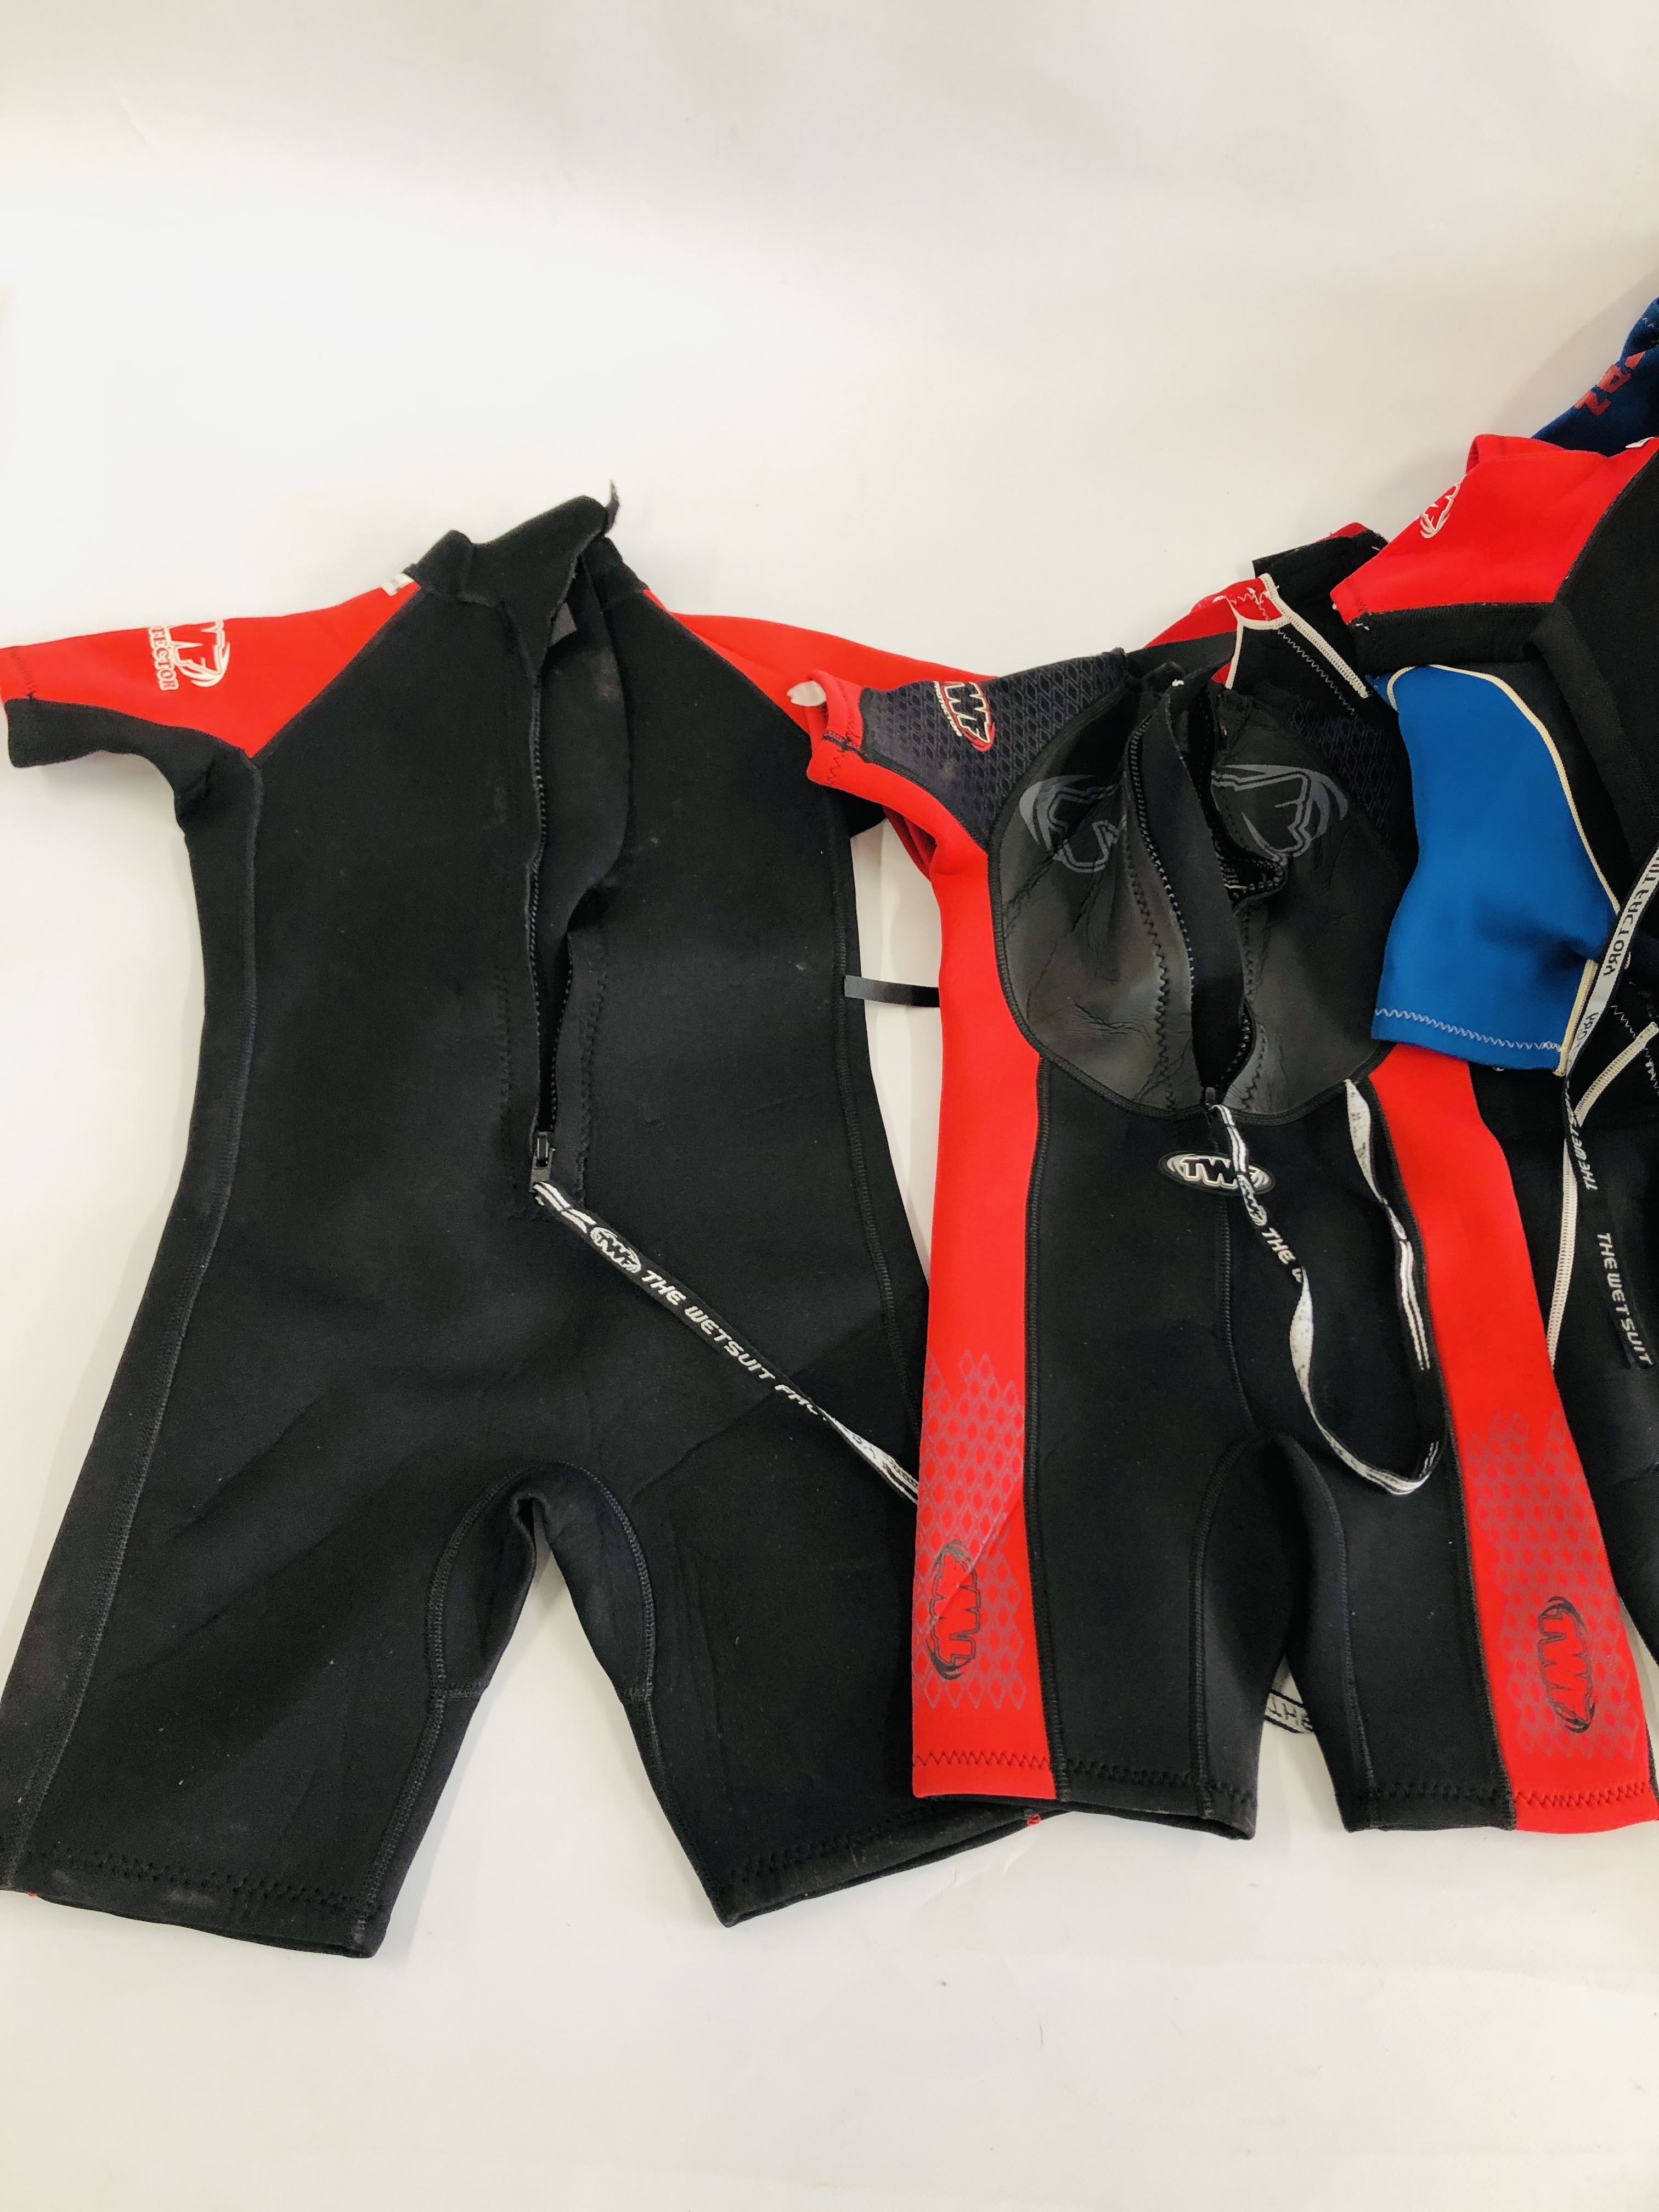 A GROUP OF 7 KIDS WET SUITS INCLUDING SIZES 11, 12 AND 8 + VARIOUS WATER SHOES. - Image 4 of 12